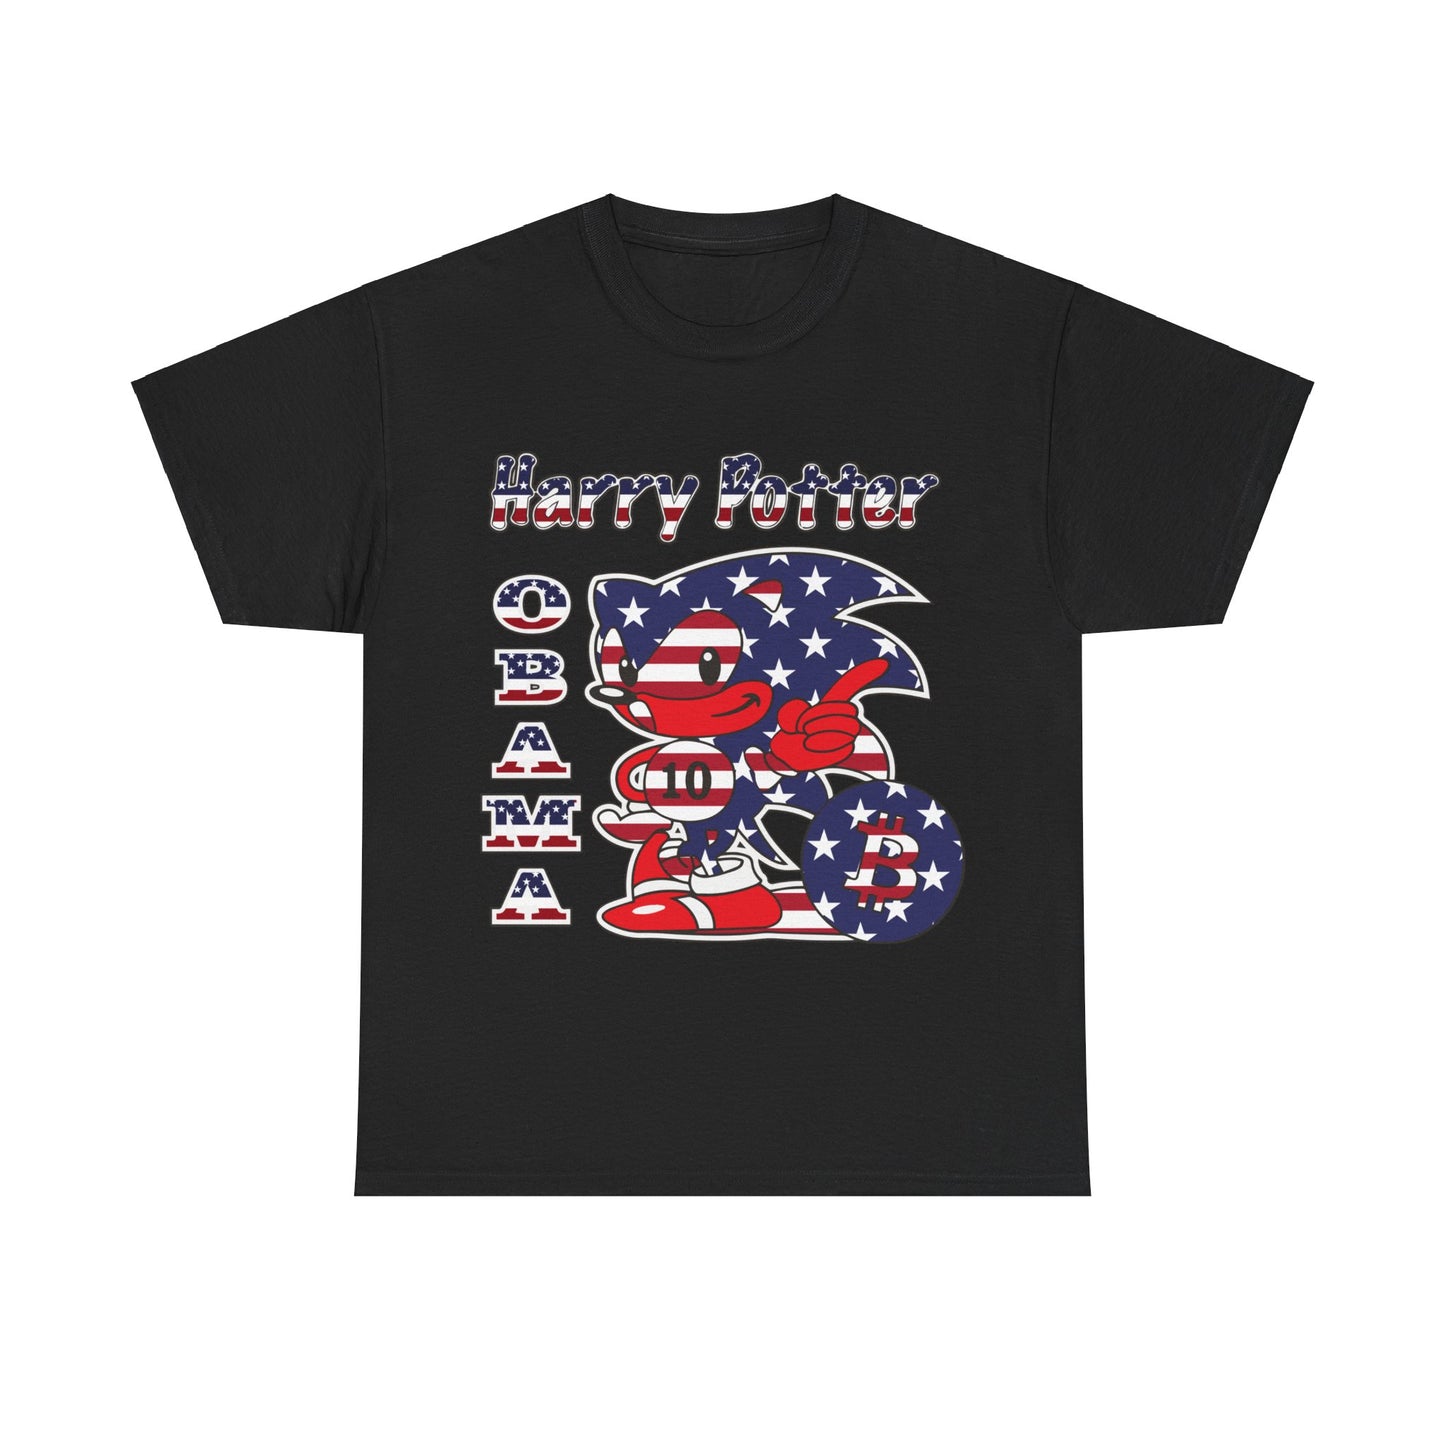 LIMITED EDITION AMERICA TOP BEST FOREVER T SHIRT